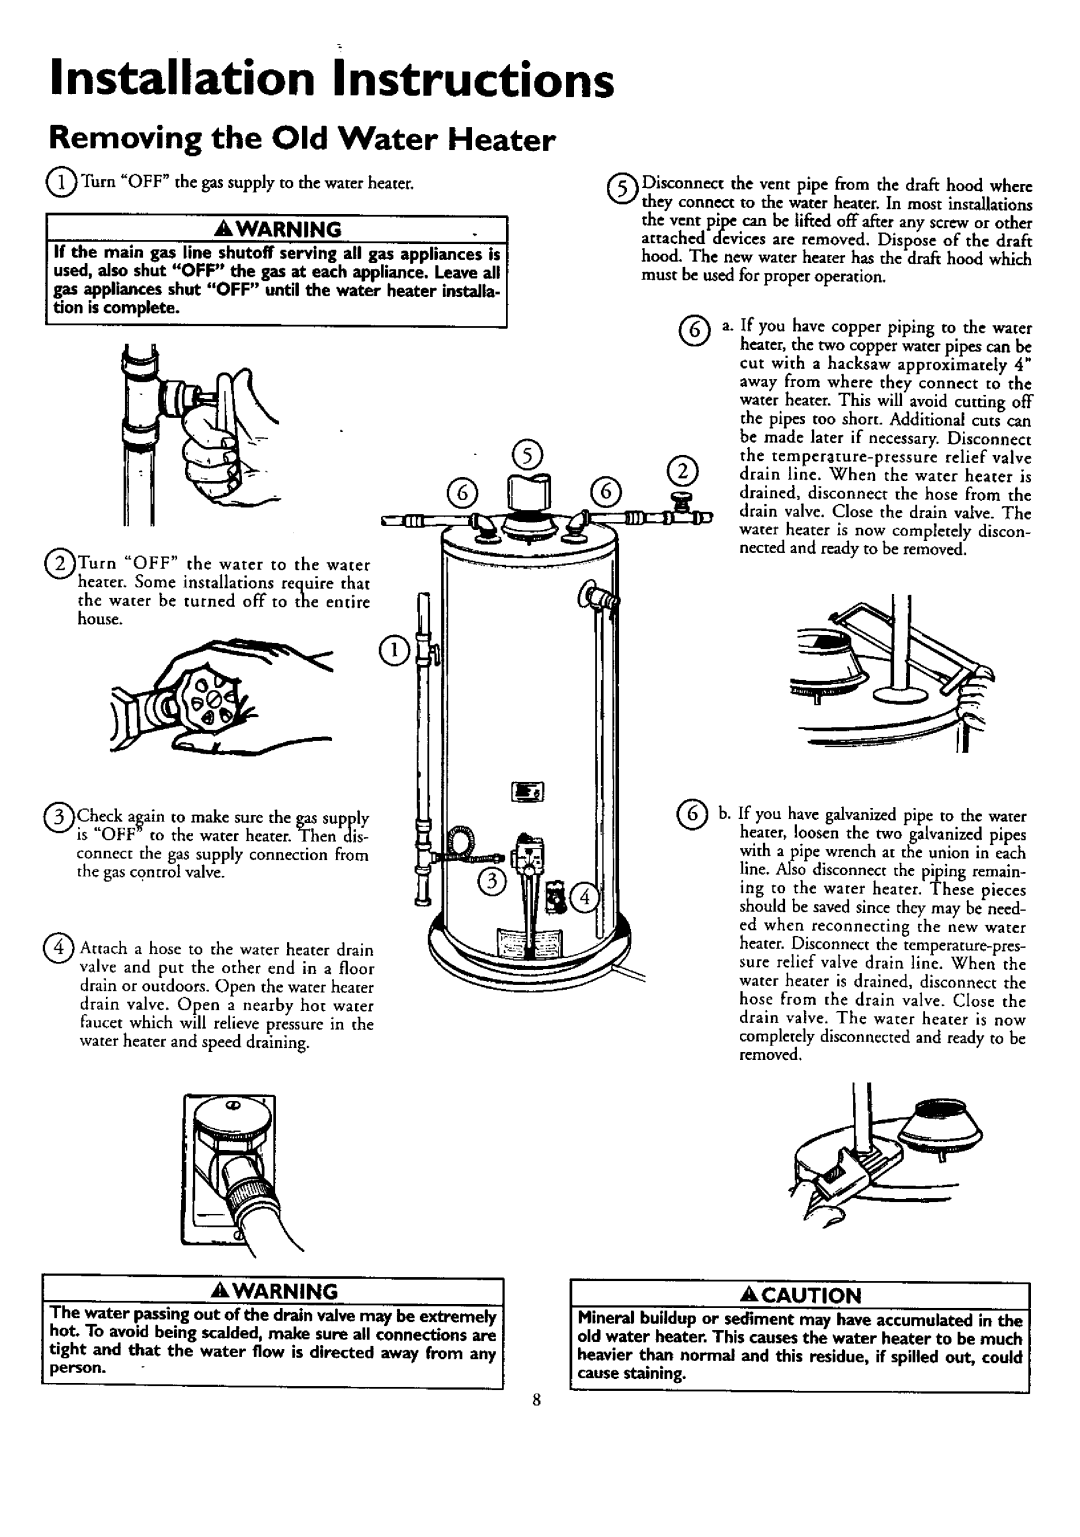 Kenmore 153.33459, 153.33449, 153.33439, 153.33429 Installation Instructions, Removing the Old Water Heater, Acaution 